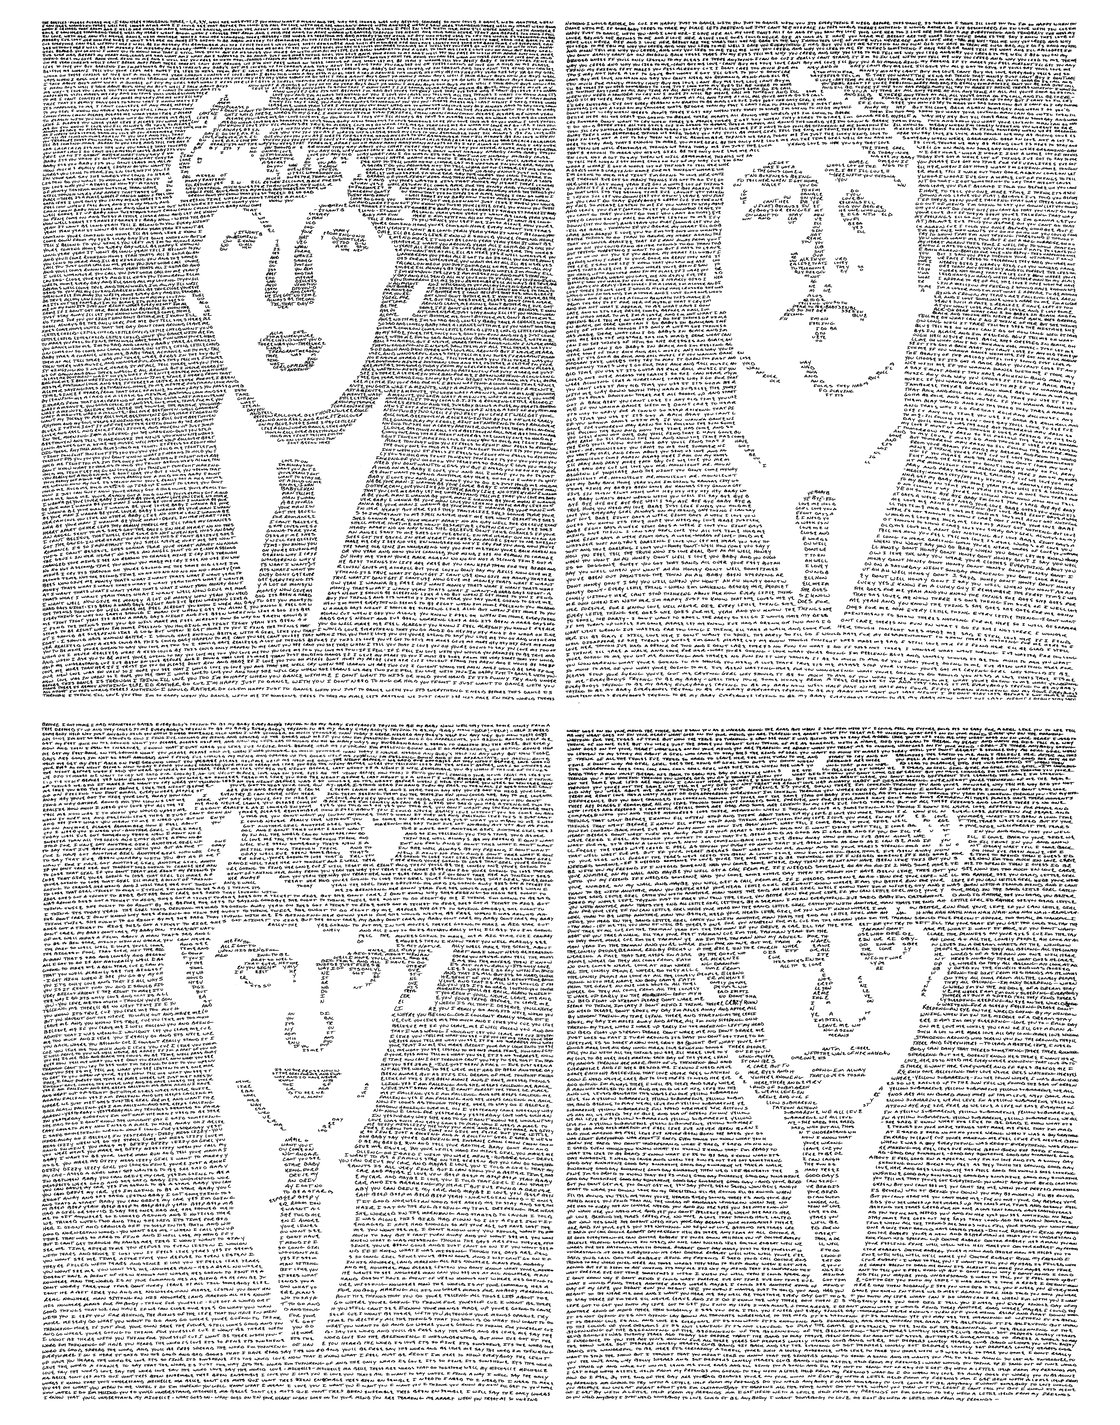 Image of Beatles - Matted 16x20